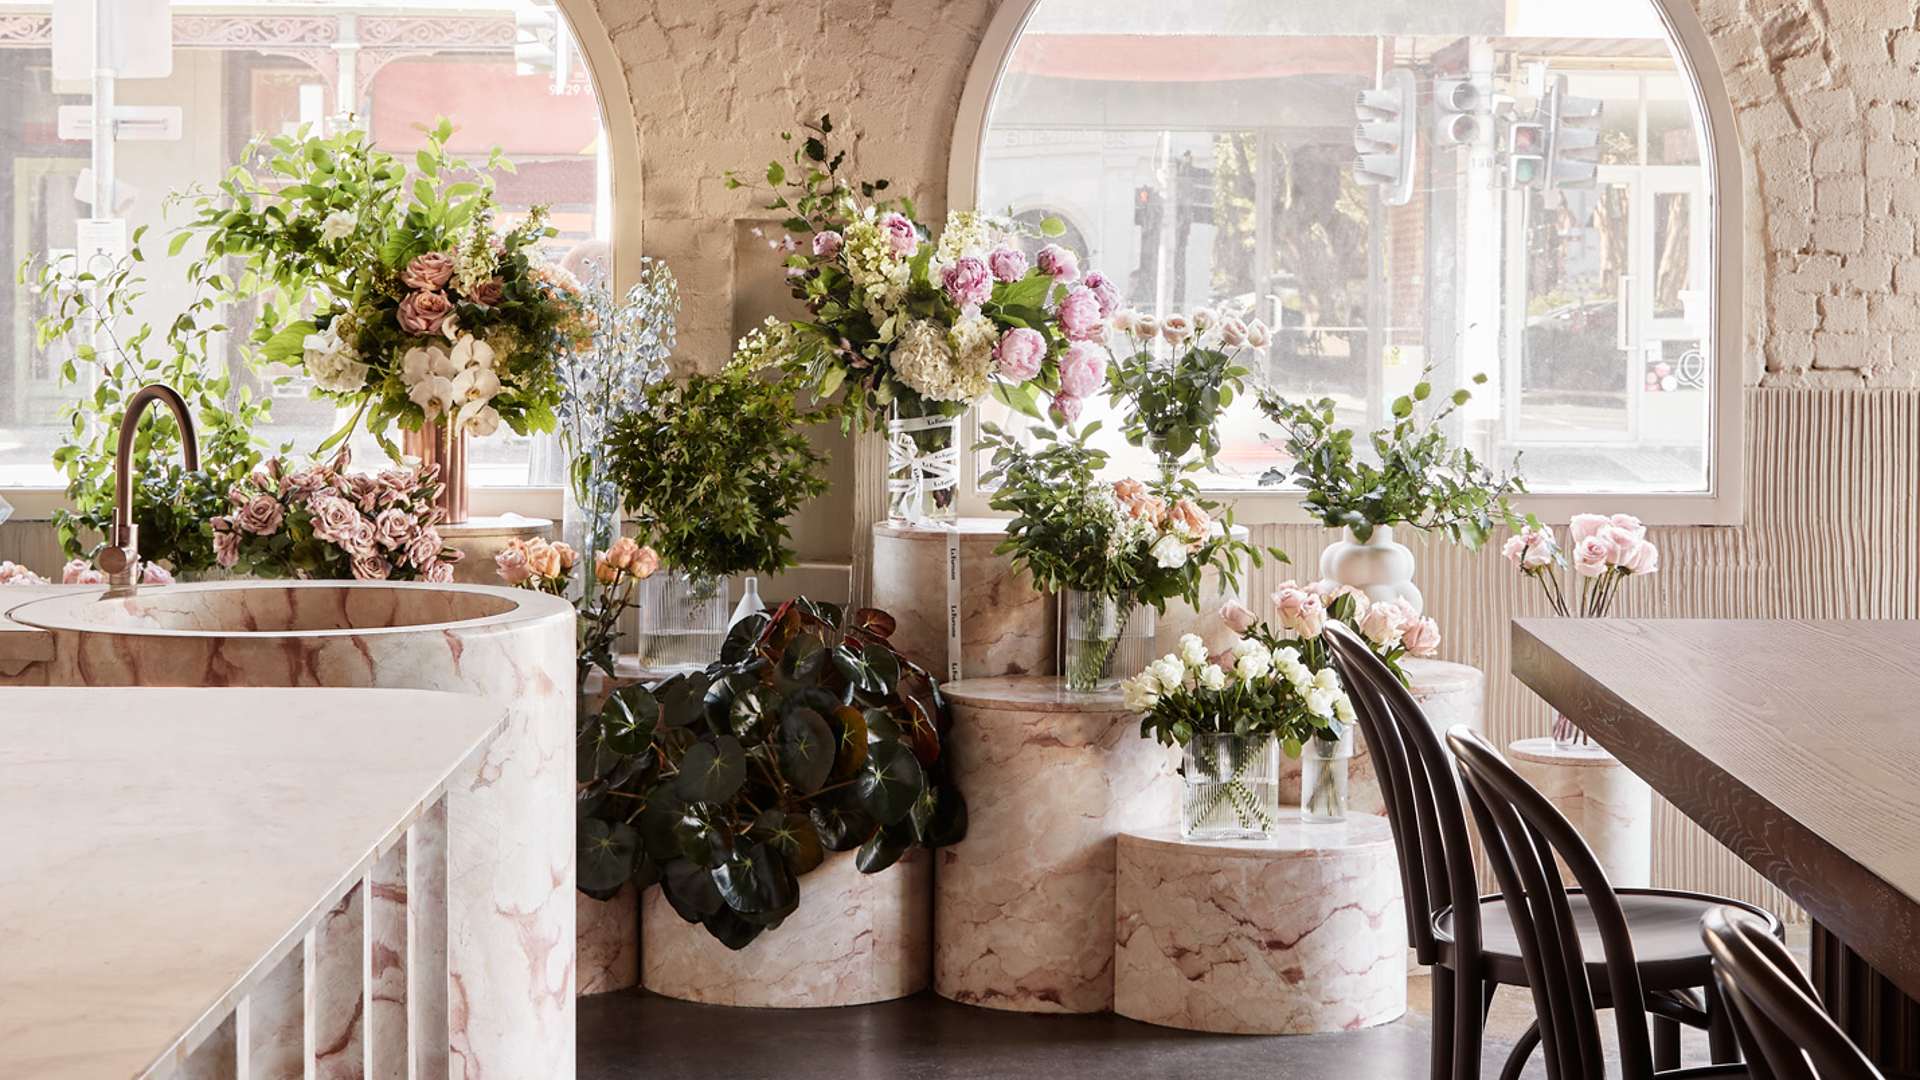 La Fantaisie Is Abbotsford's New Florist, Cafe and Patisserie From the Flovie Team